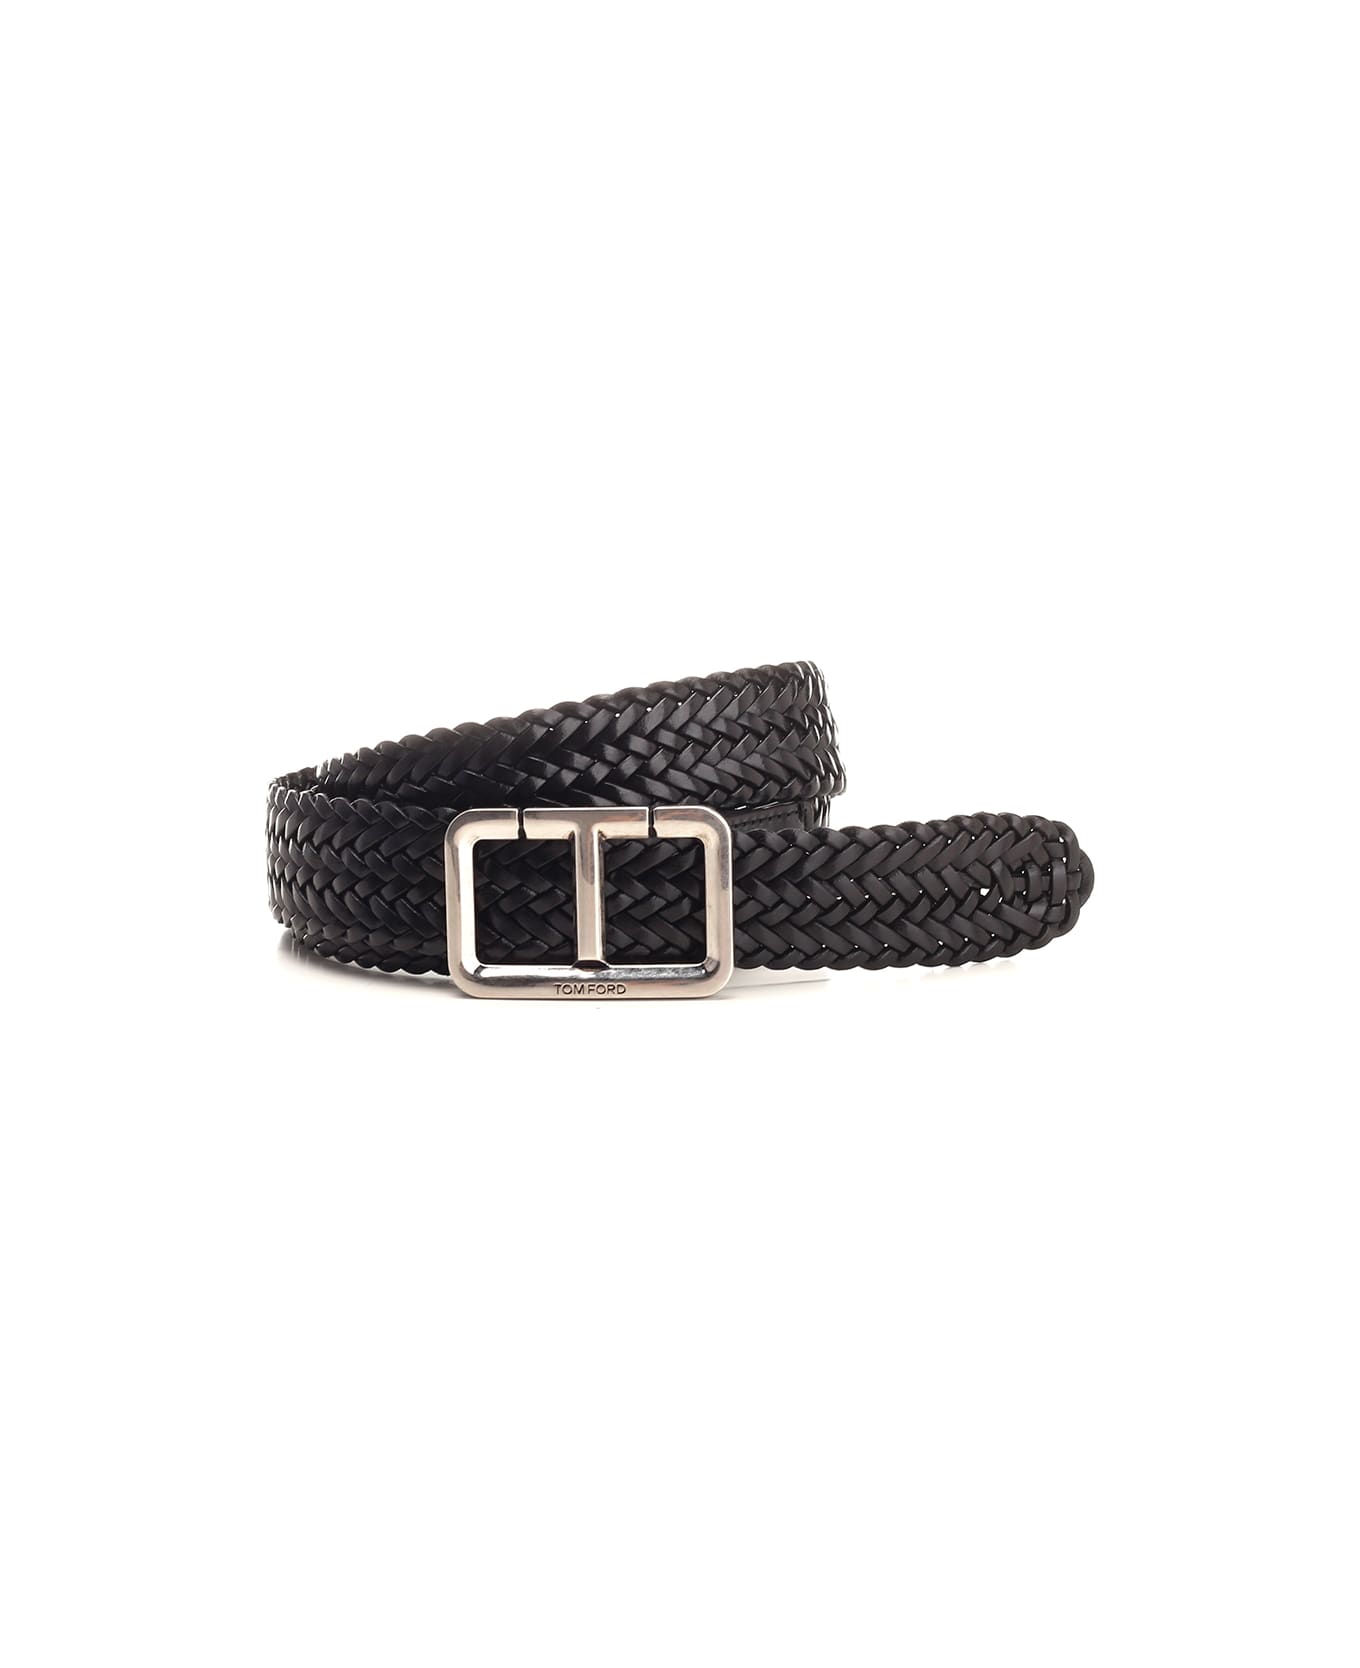 Tom Ford "t" Belt In Woven Leather - Black